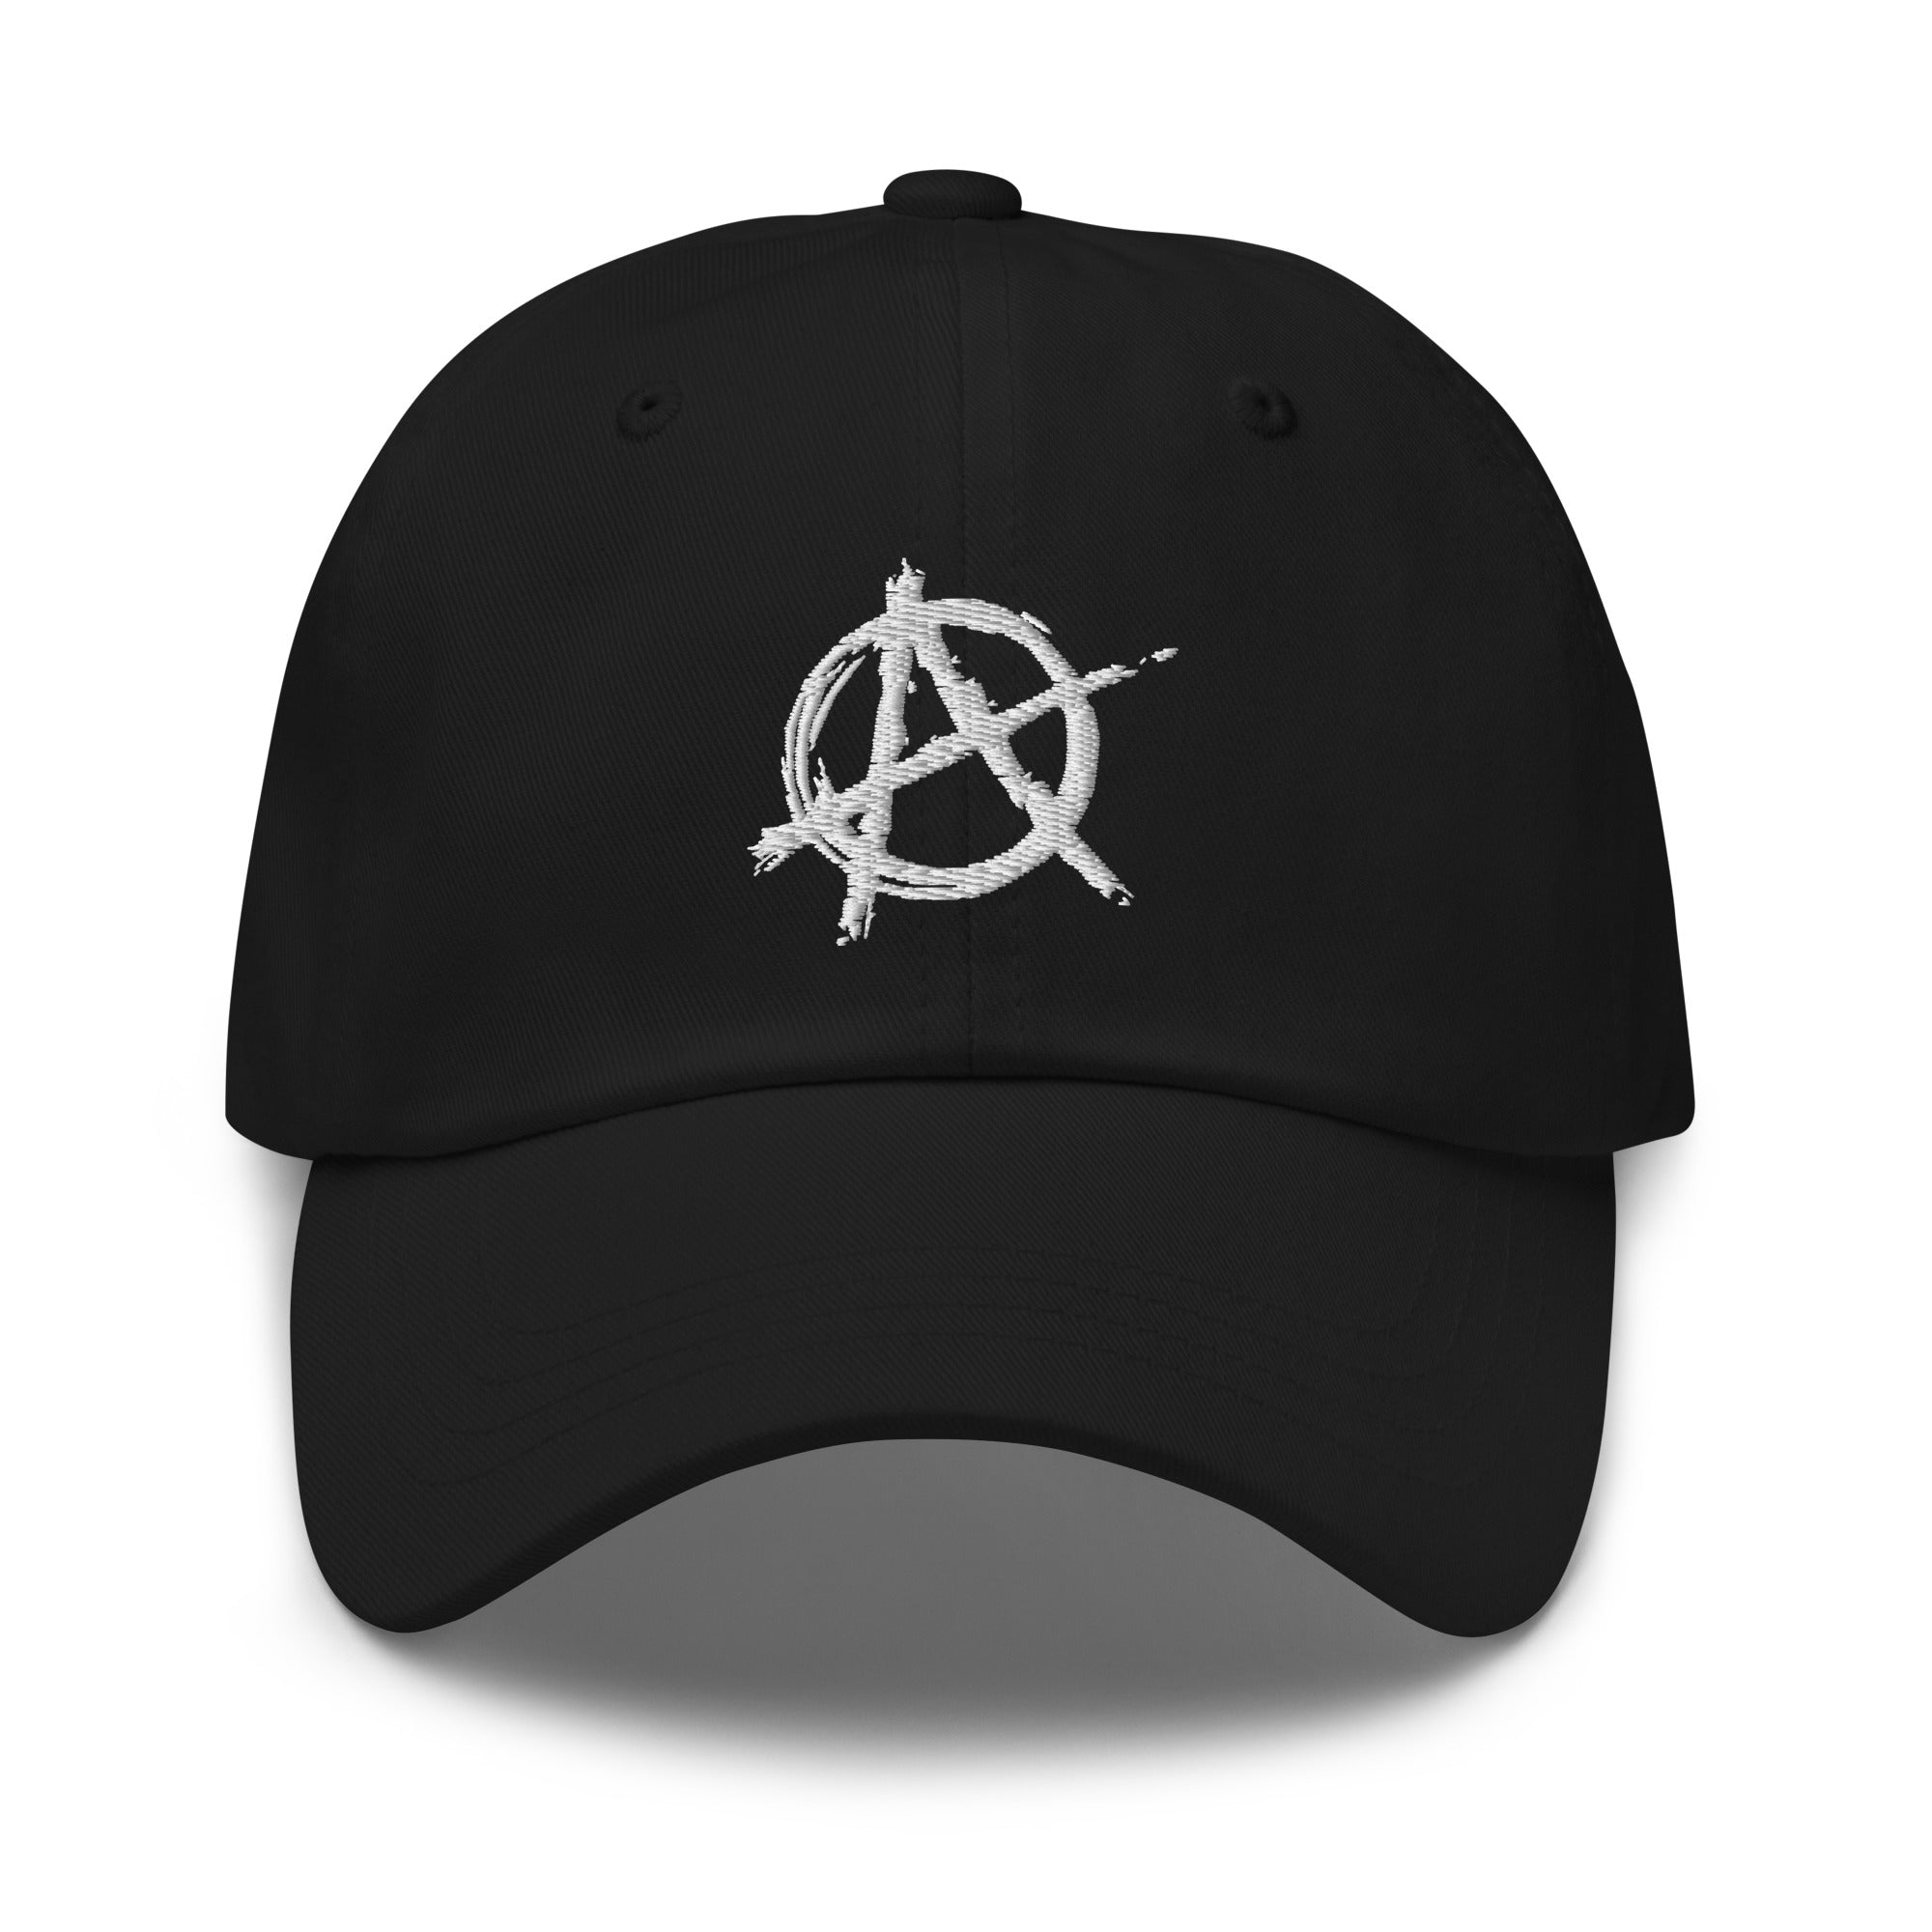 Anarchy Sign Punk Chaos and Rock n' Roll Embroidered Baseball Cap Dad hat - Edge of Life Designs